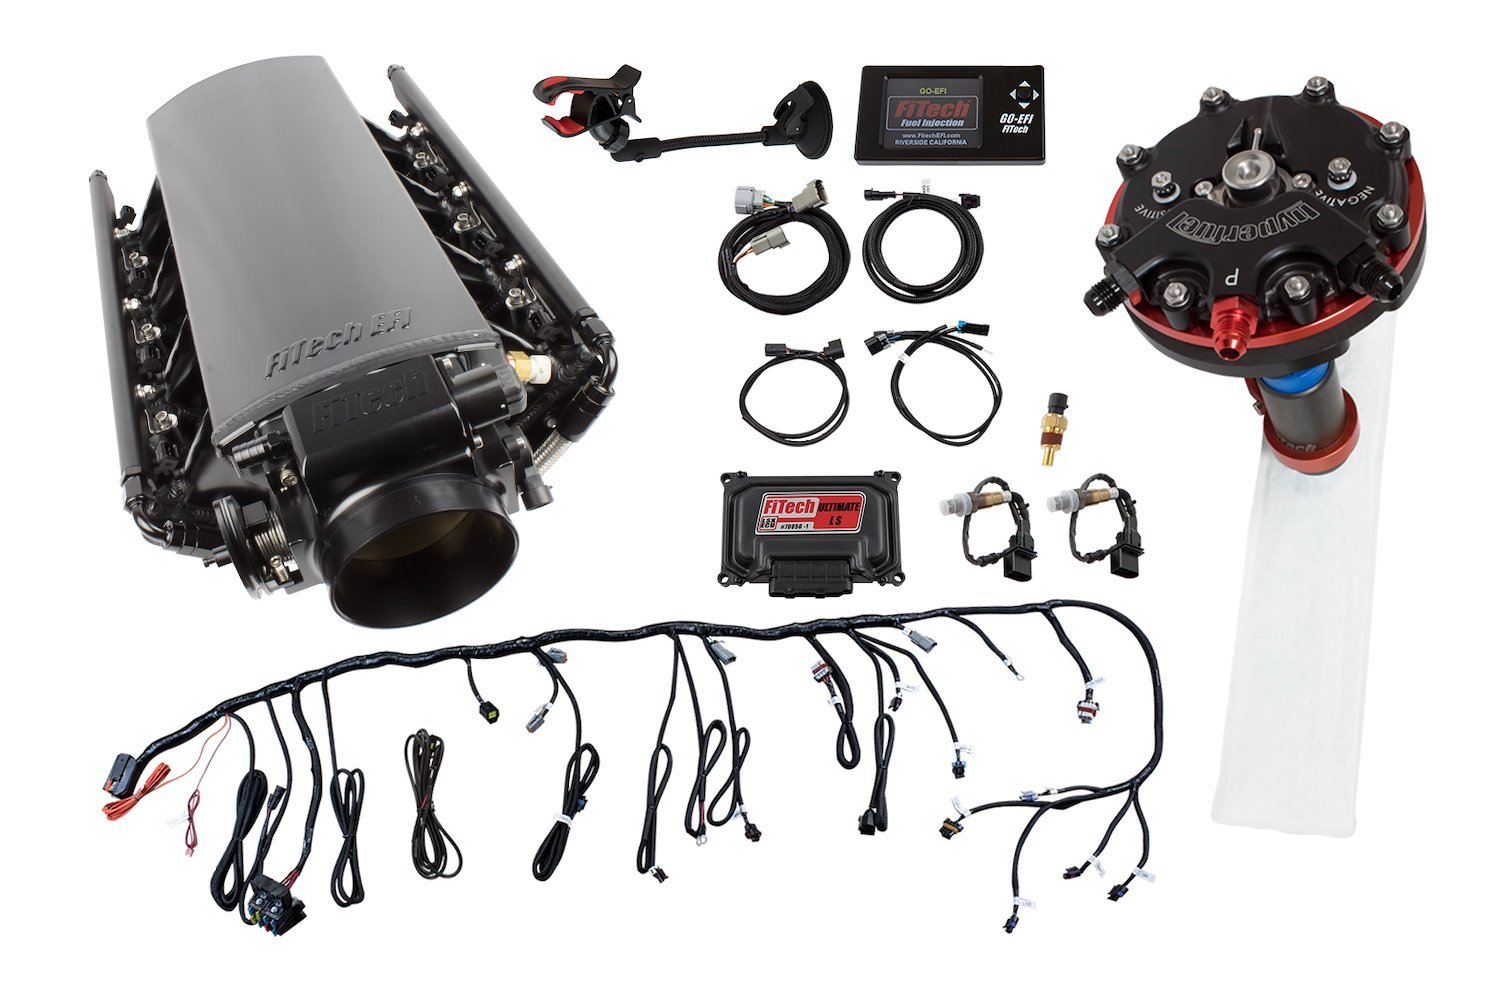 Ultimate LS EFI Induction System LS3/L92 500 HP with Transmission Control and Hy-Fuel Single Pump Regulated In-Tank Retrofit Kit